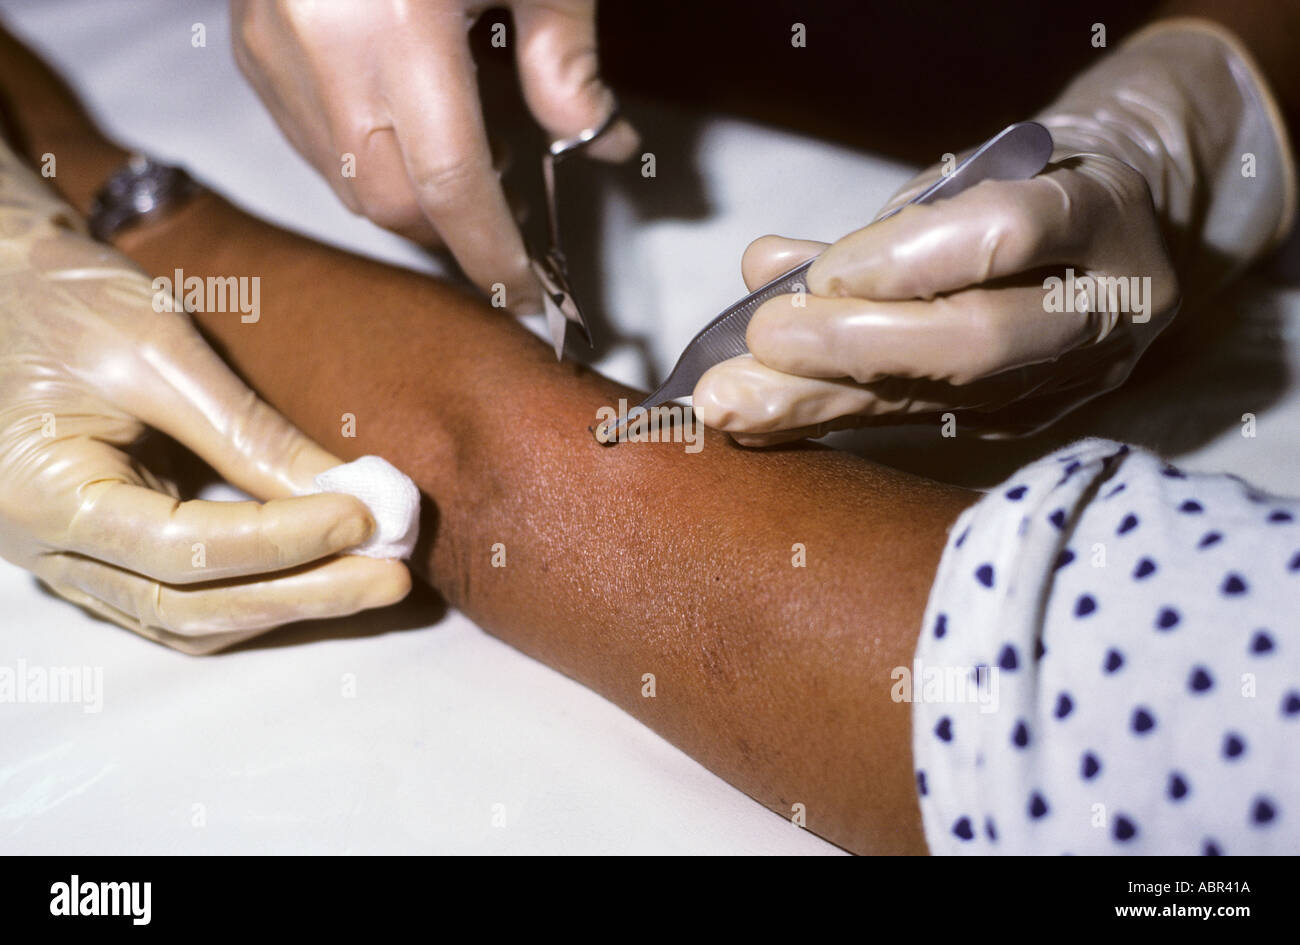 Manaus, Brazil. Doctor wearing surgicial rubber gloves taking as sample from patient with Hansen's disease. Amazonas State. Stock Photo